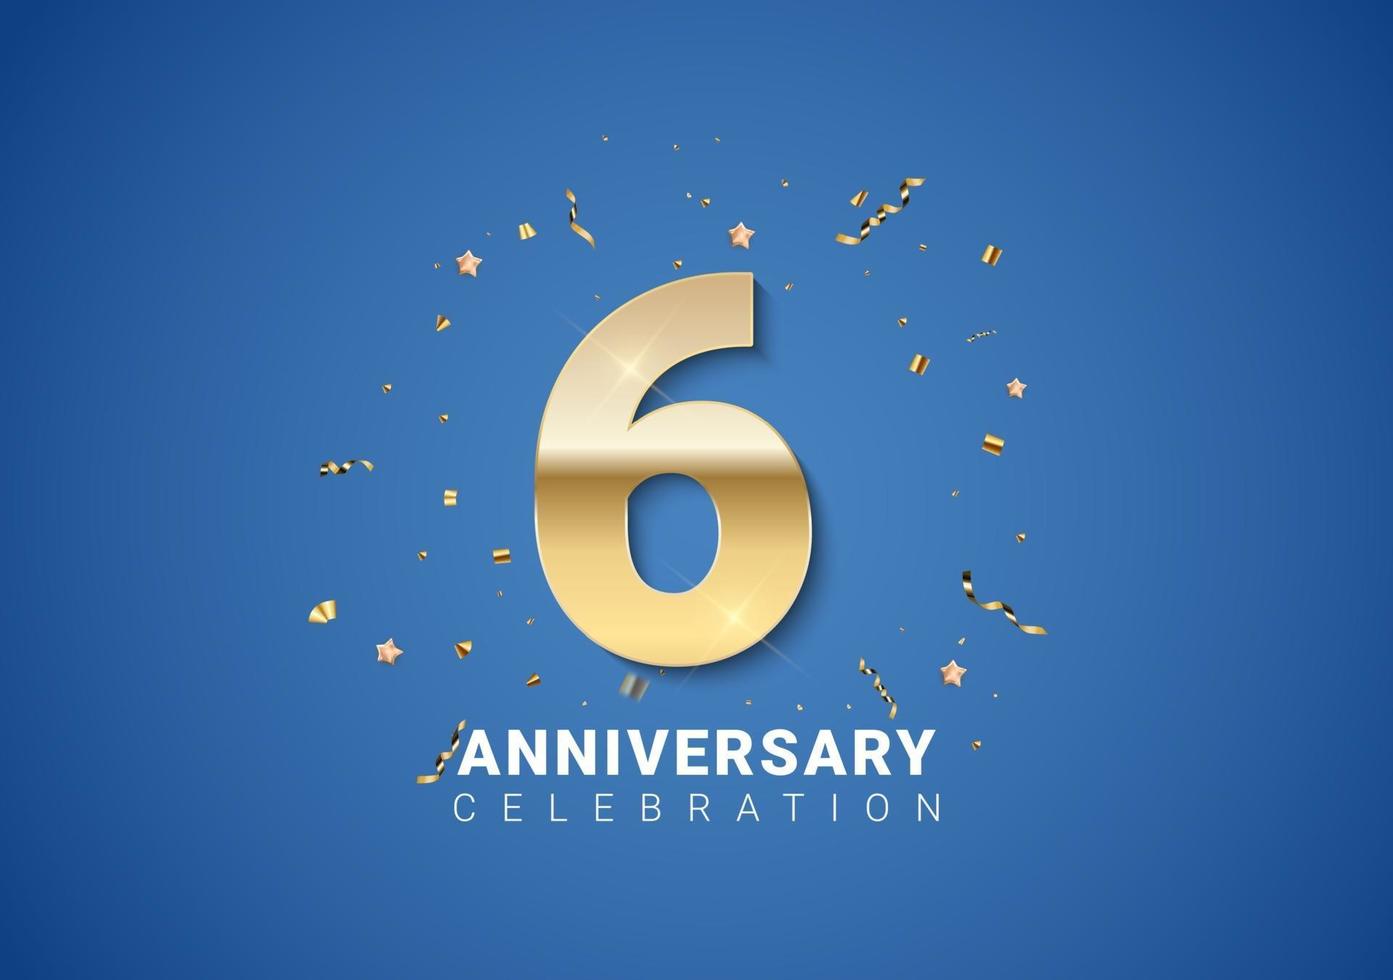 6 anniversary background with golden numbers, confetti, stars vector